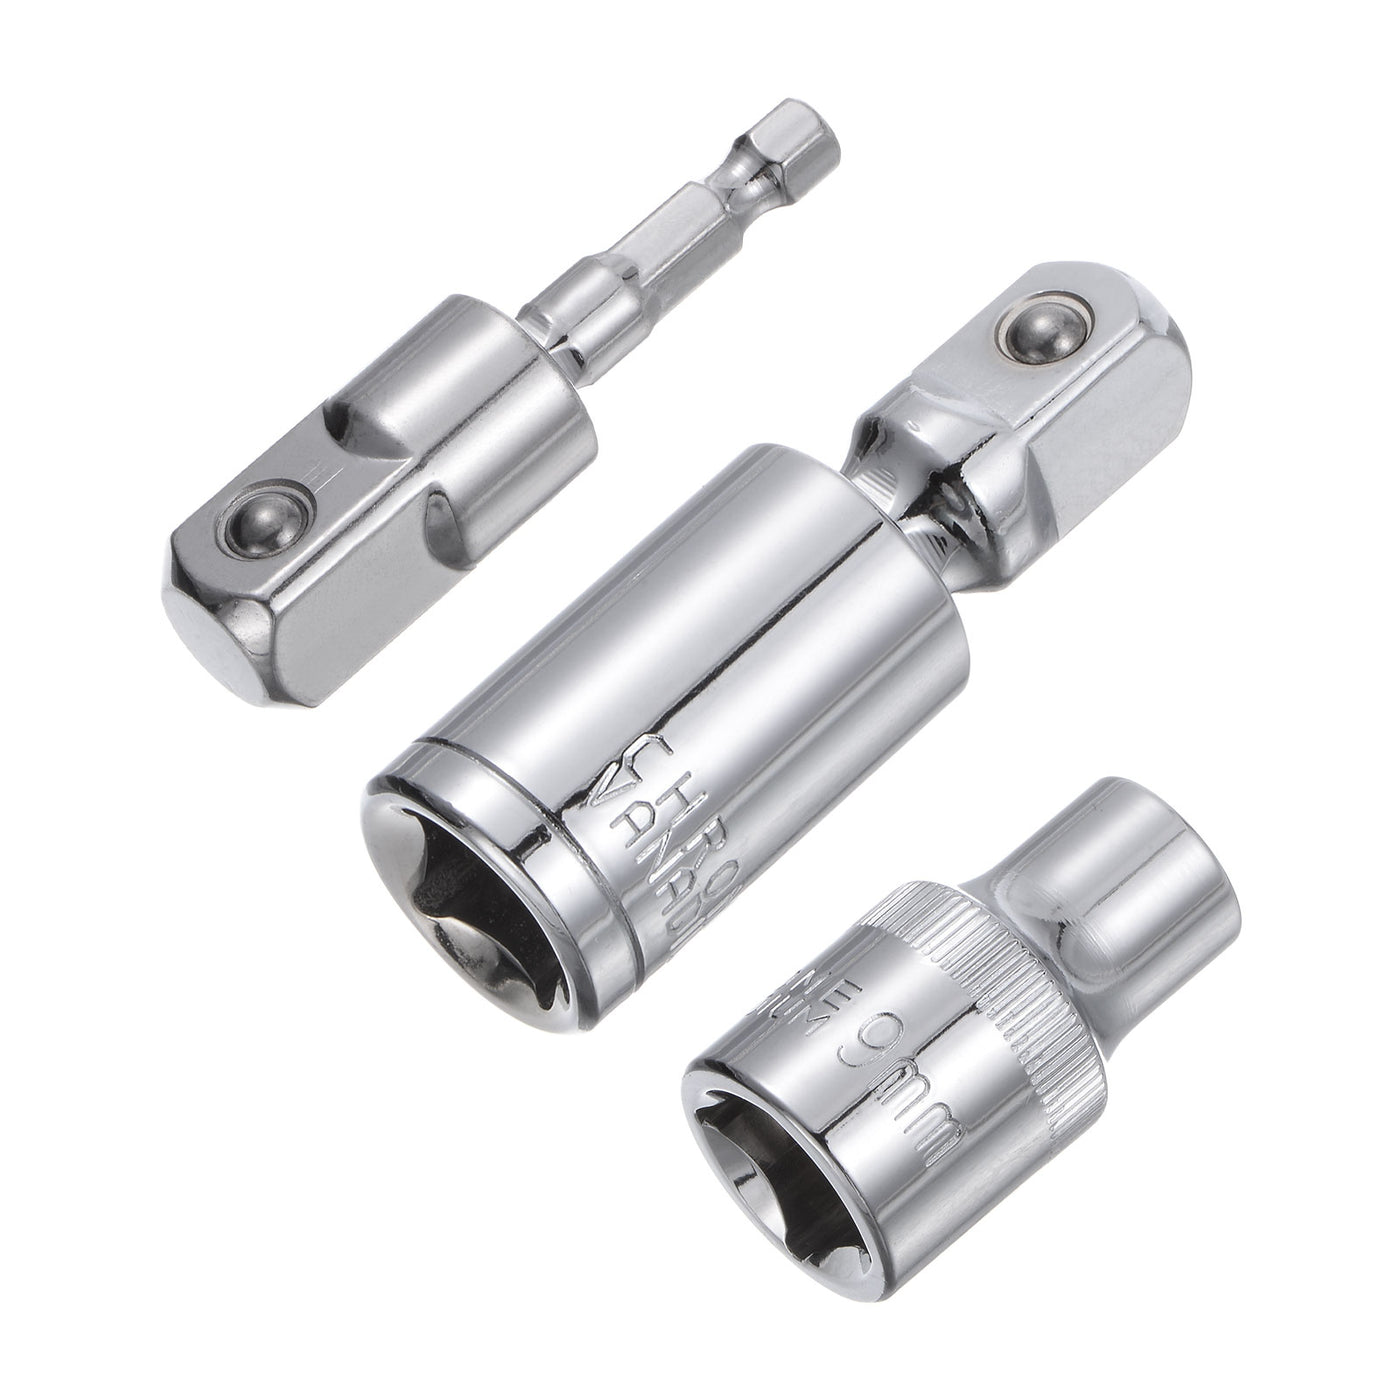 uxcell Uxcell 1/2" Drive 9mm Shallow Socket Swivel Joints Hex Shank Impact Driver Adaptor Set